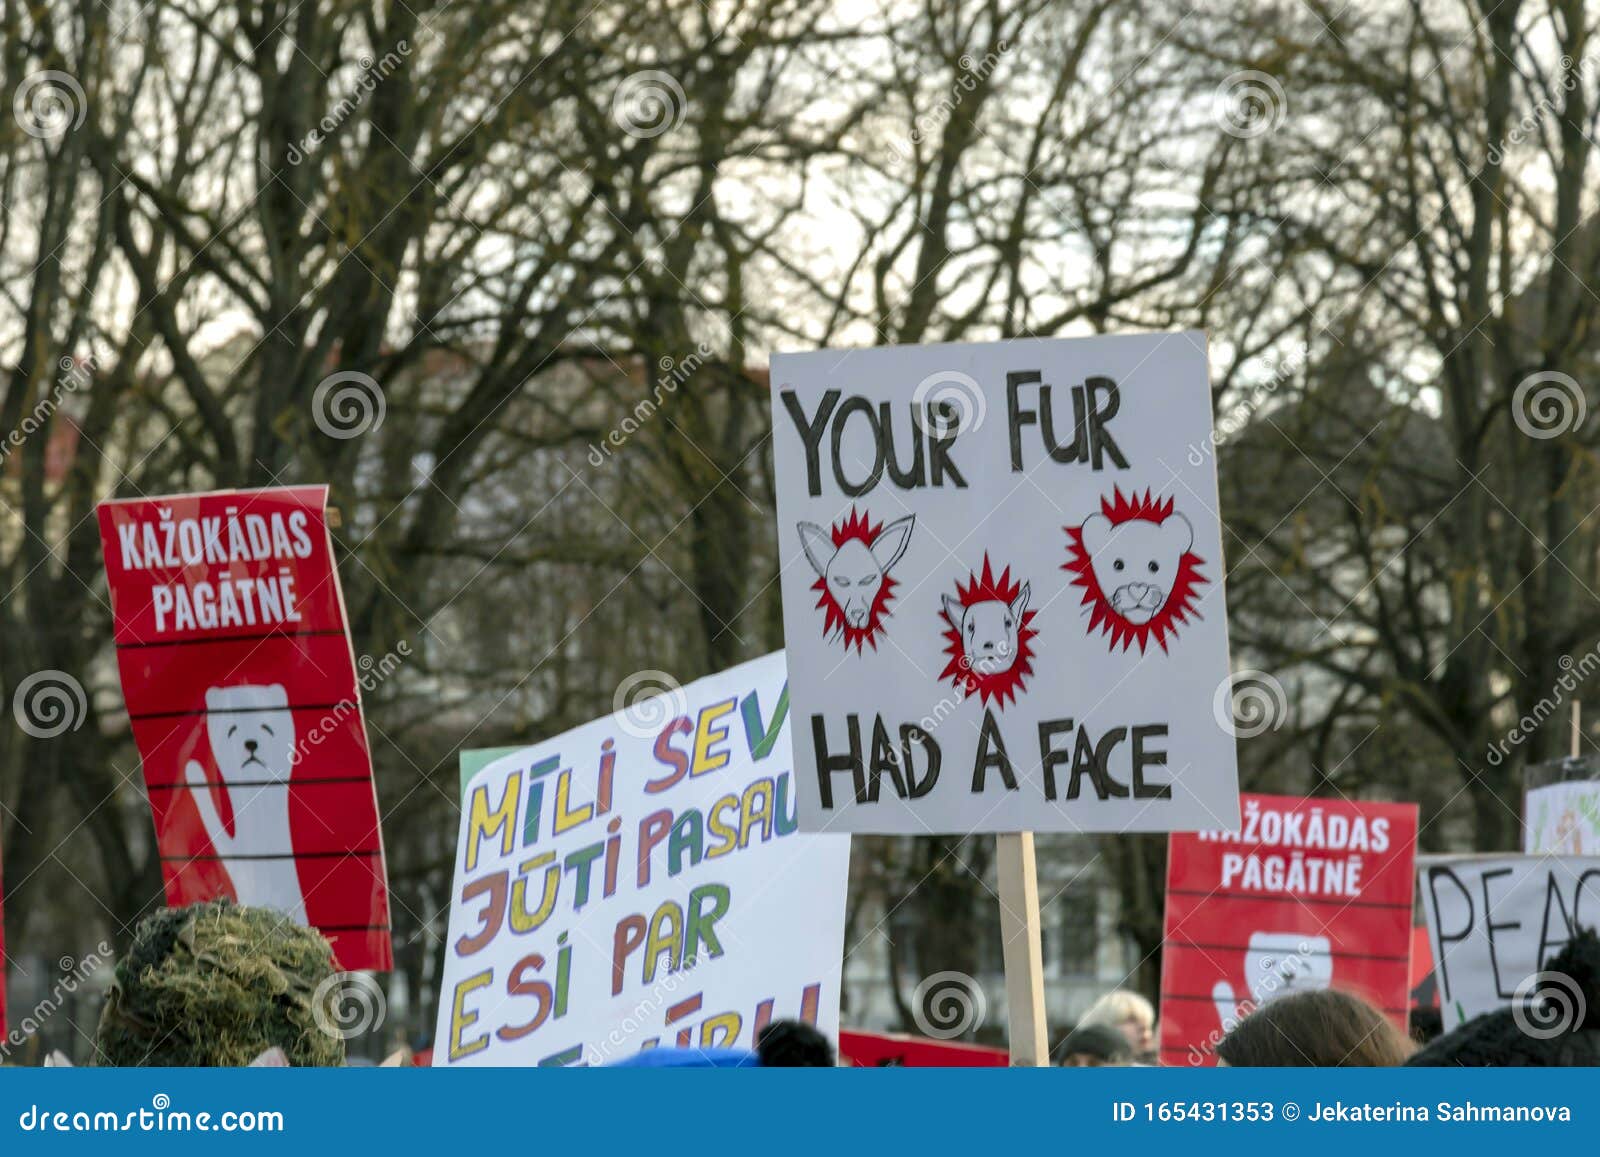 Crowd of Activists at Animal Advocacy Event with Signs and Banners in Hands  Protest Against Animal Abuse Editorial Stock Photo - Image of event,  opposition: 165431353